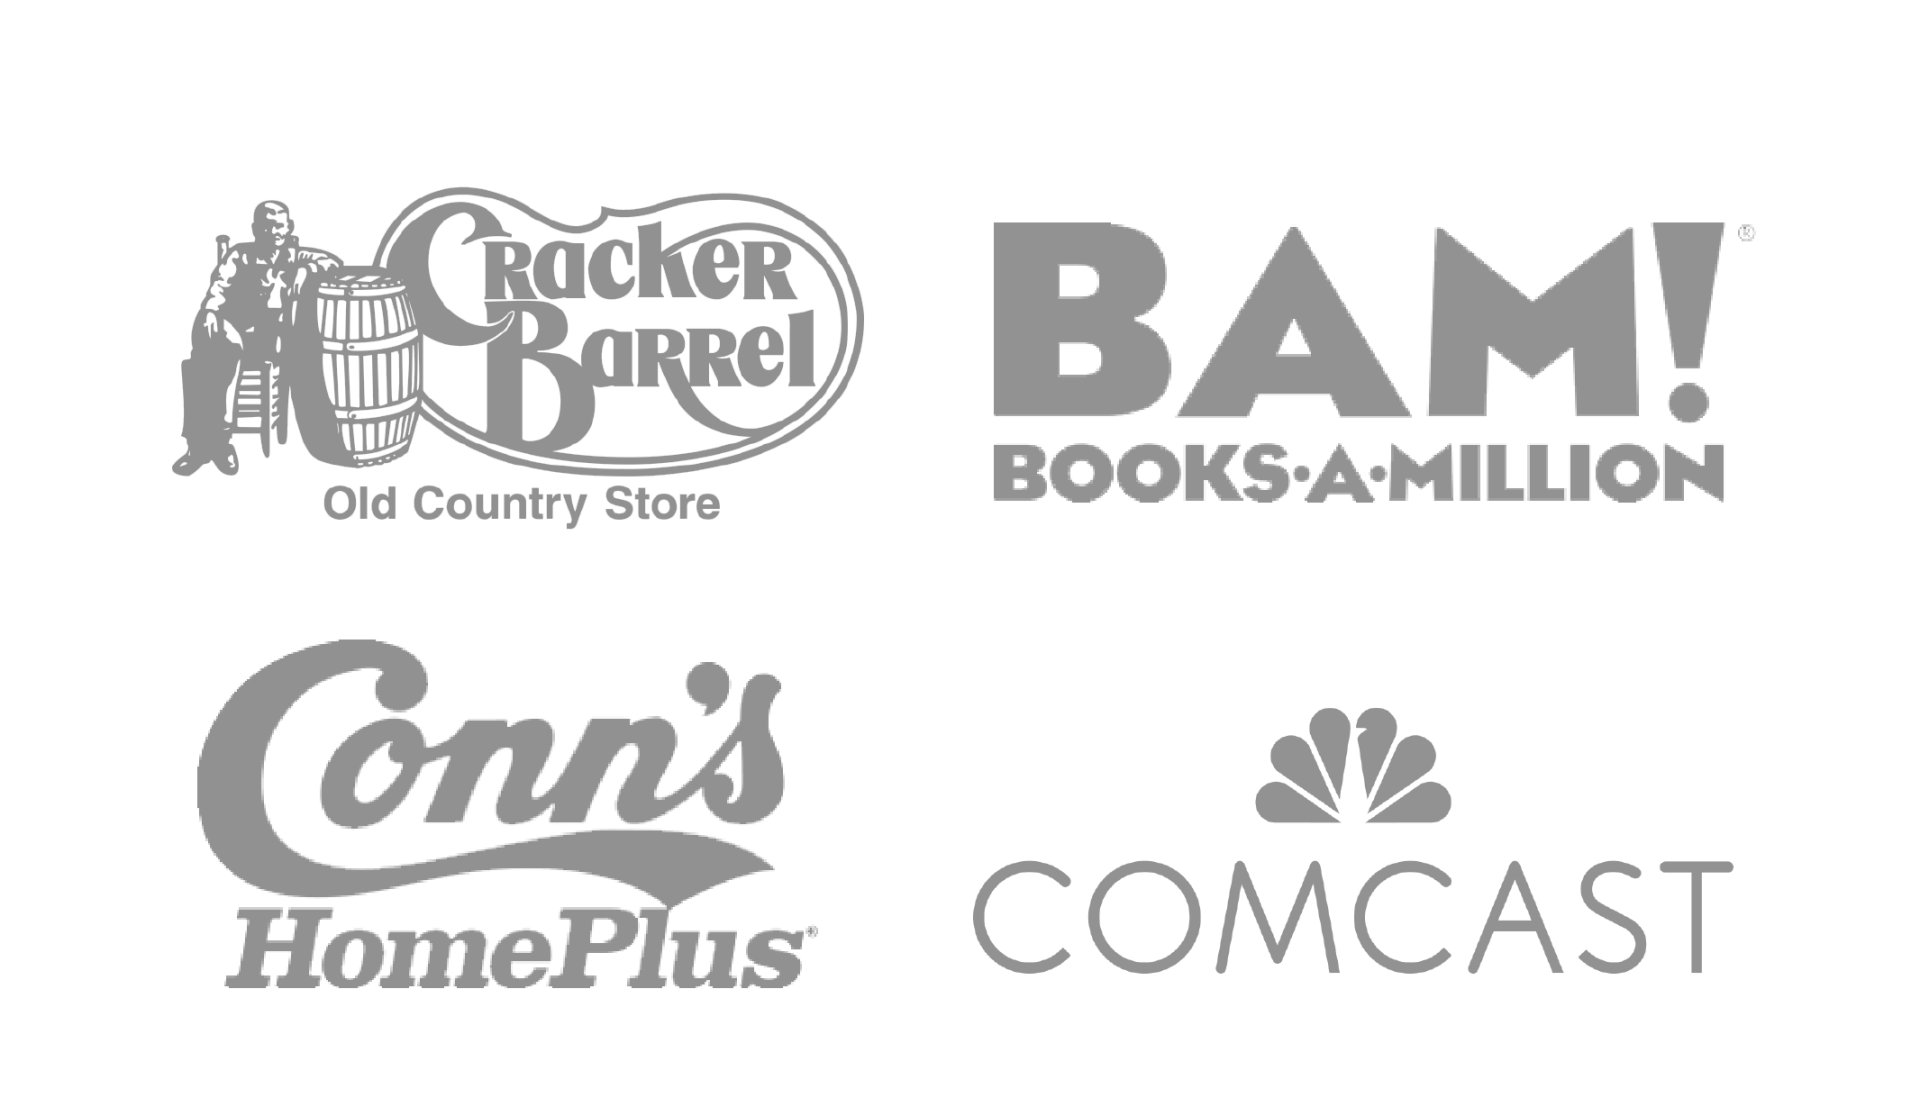 a black and white logo for a company called bam books a million .